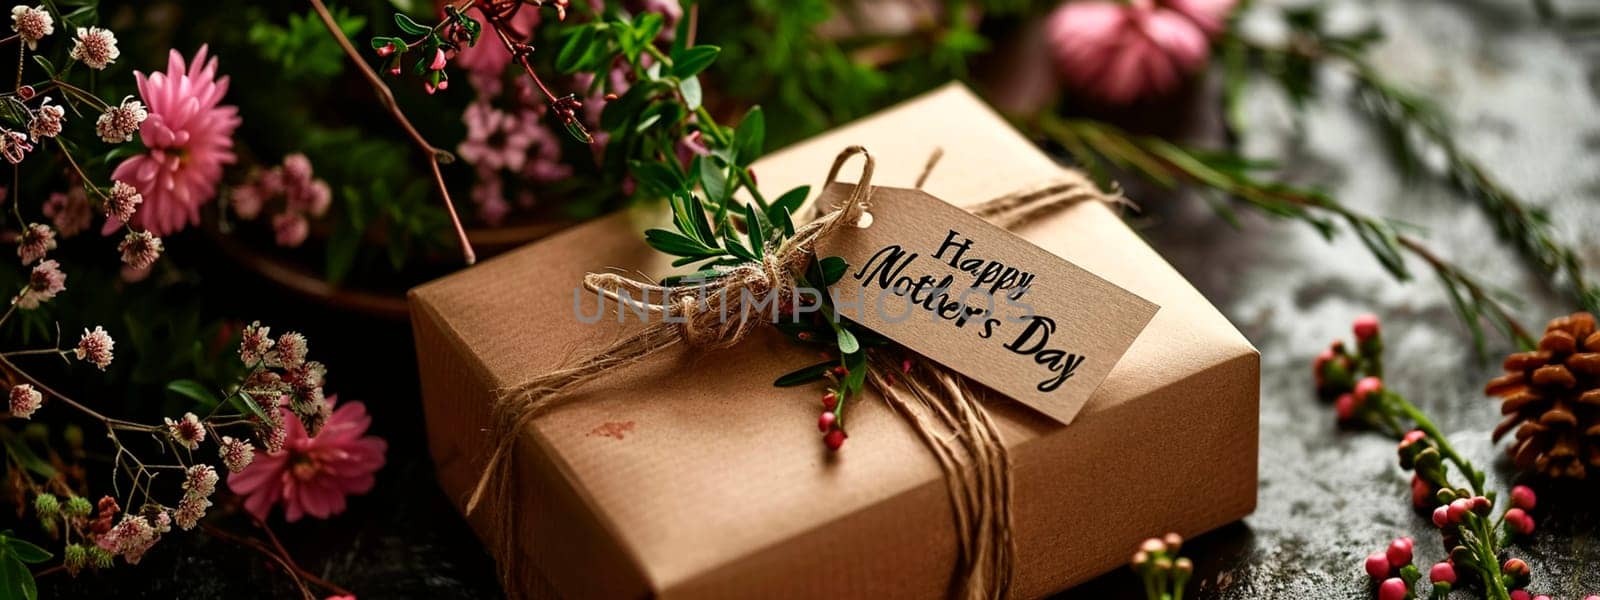 Gift and flowers for Mother's Day. Selective focus. by yanadjana